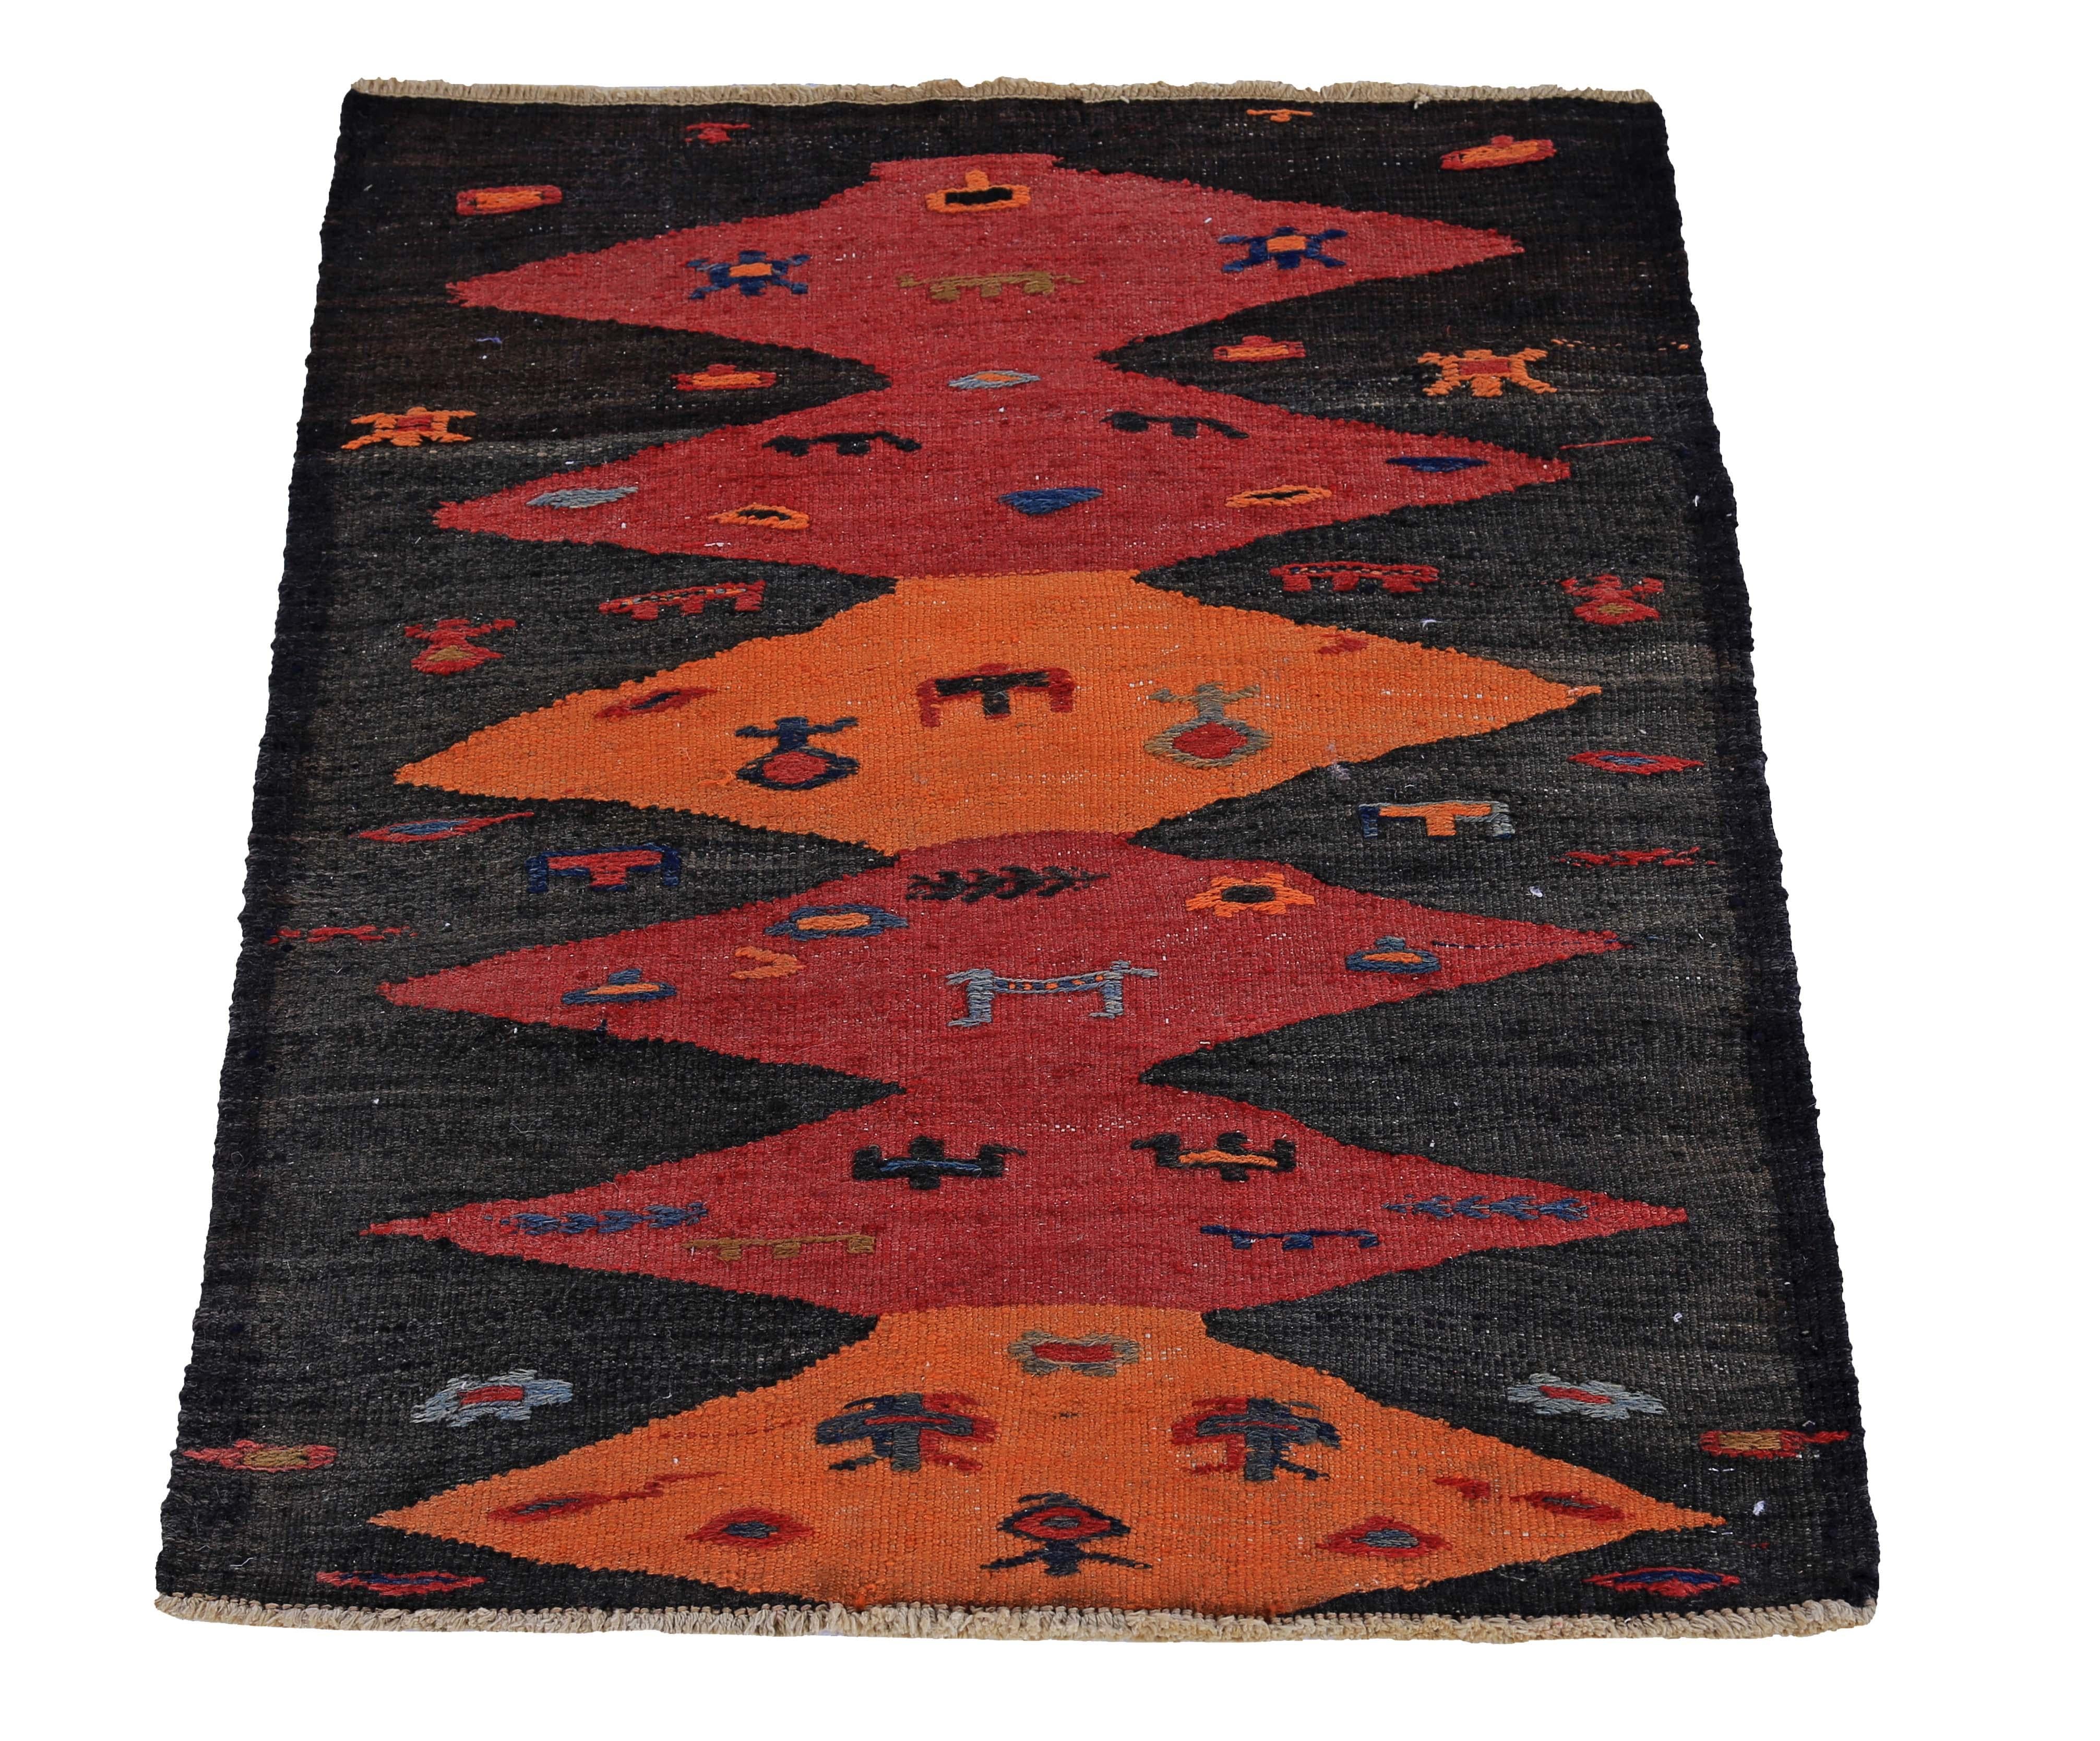 Turkish rug handwoven from the finest sheep’s wool and colored with all-natural vegetable dyes that are safe for humans and pets. It’s a traditional Kilim flat-weave design featuring red and orange diamond patterns in a black field. It’s a stunning